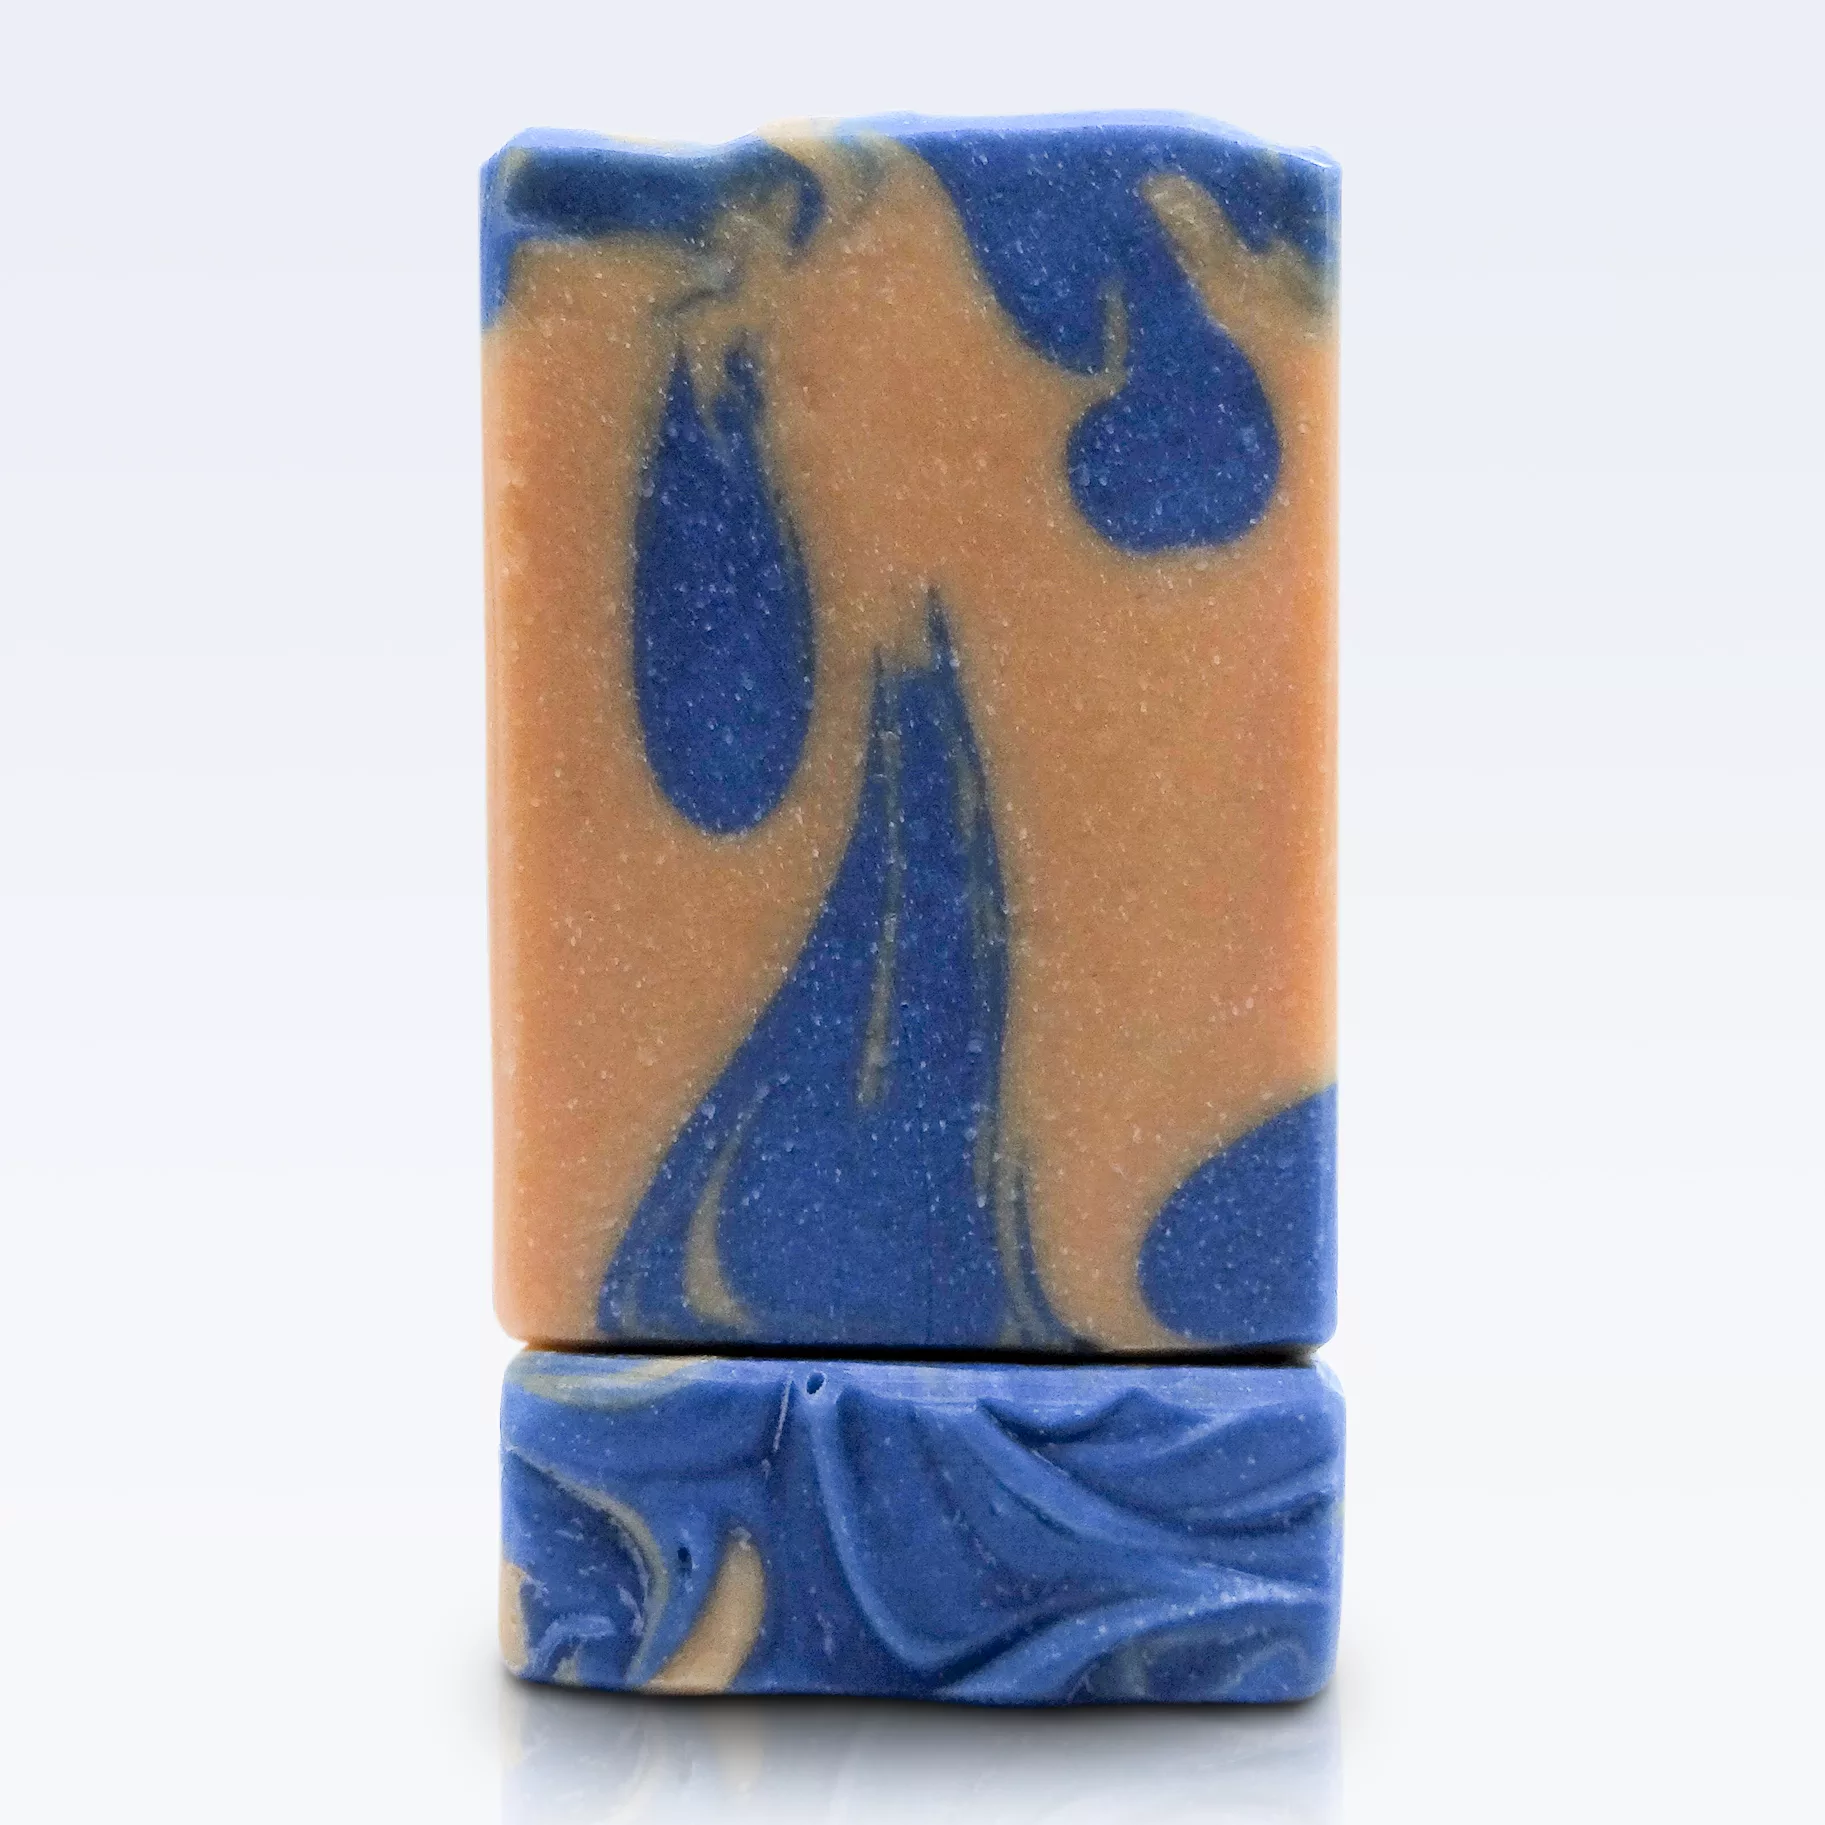 Barber Shop handmade soap by Tubby Tabby Soaps (bay rum mens fragrance)